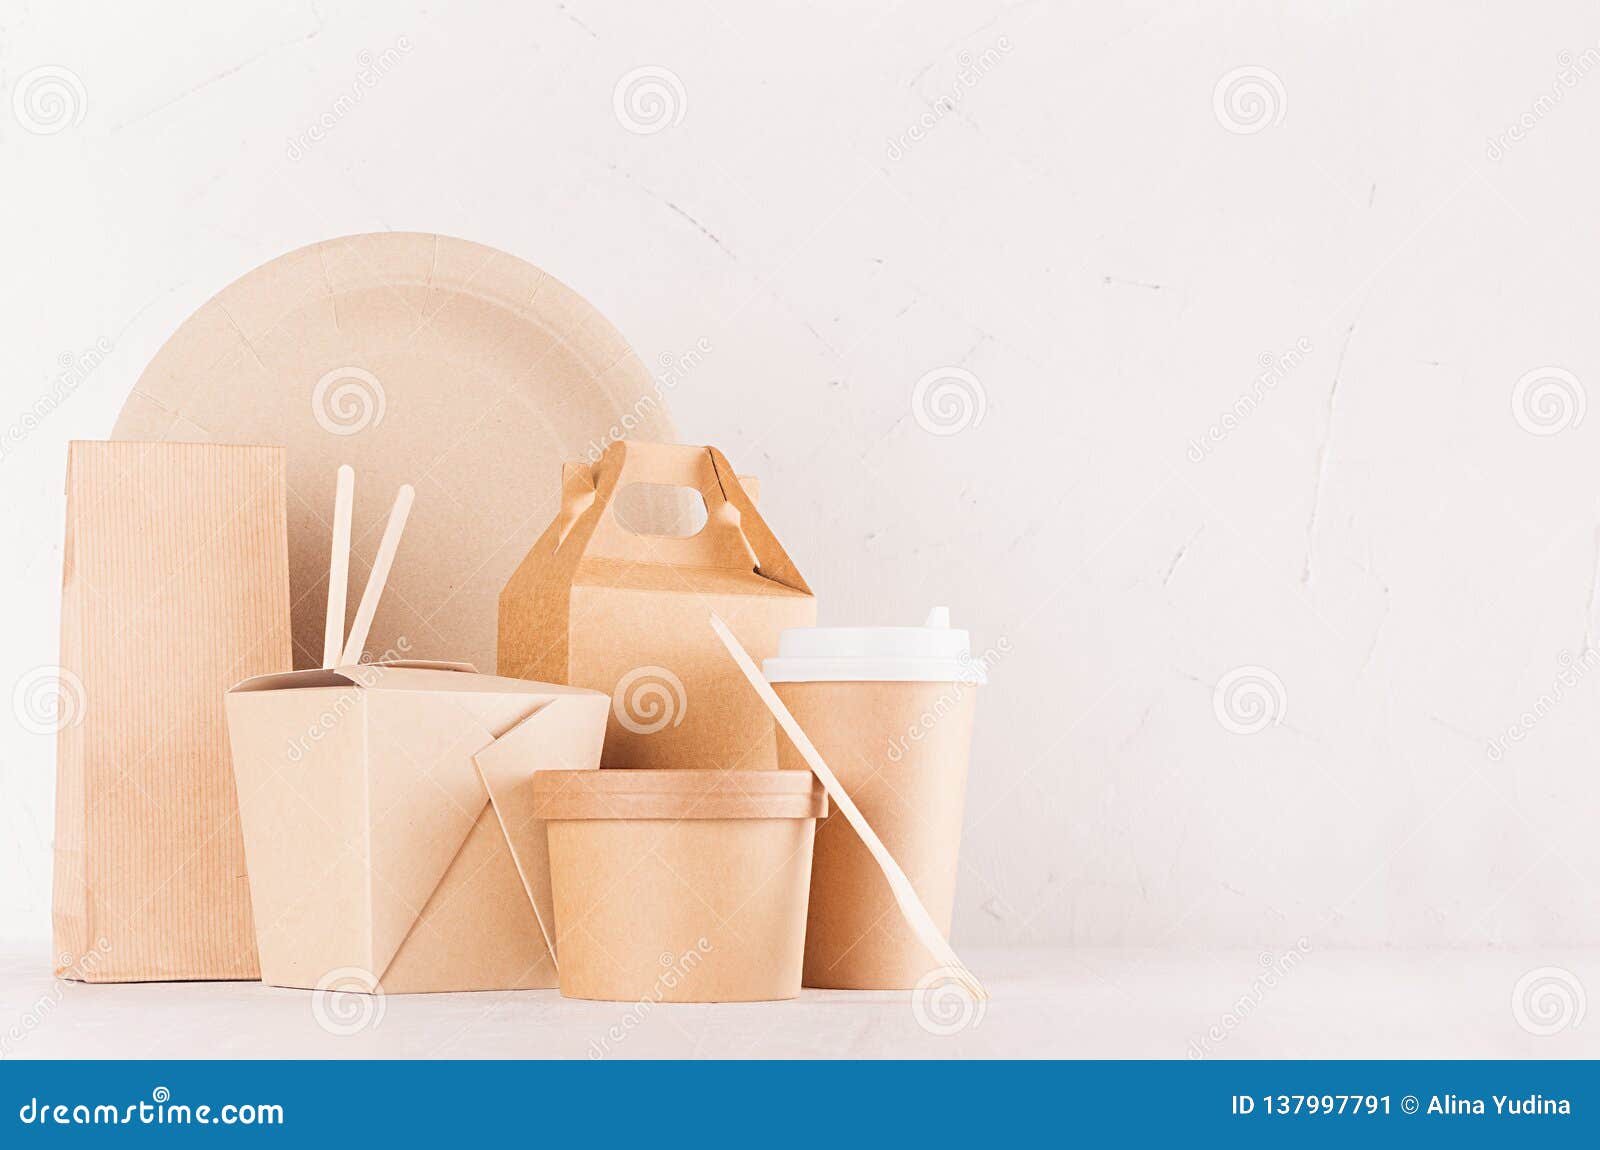 Download Mockup Food Takeaway Packaging For Cafe And Restaurant Blank Container Box Bowl For Food Drink Packet Chopsticks Of Paper Stock Image Image Of Pack Cafe 137997791